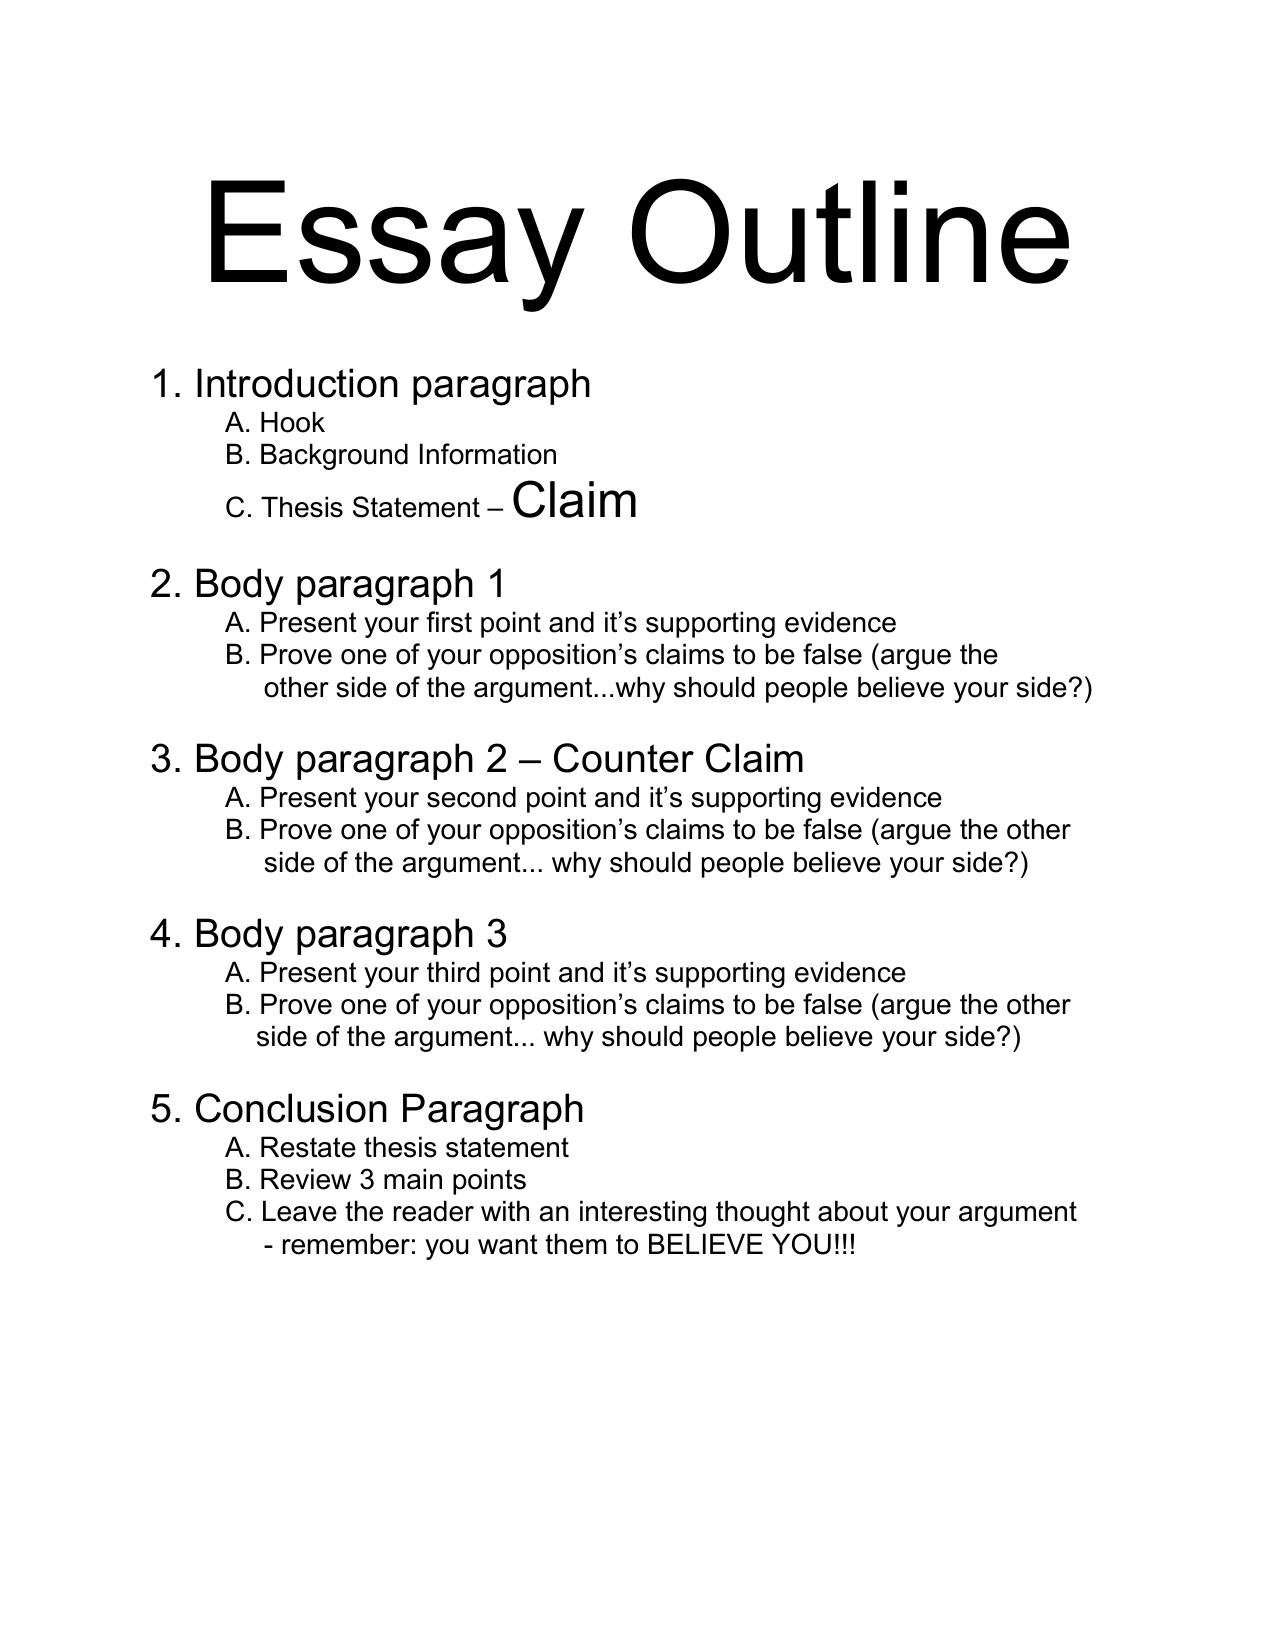 Pay for essay